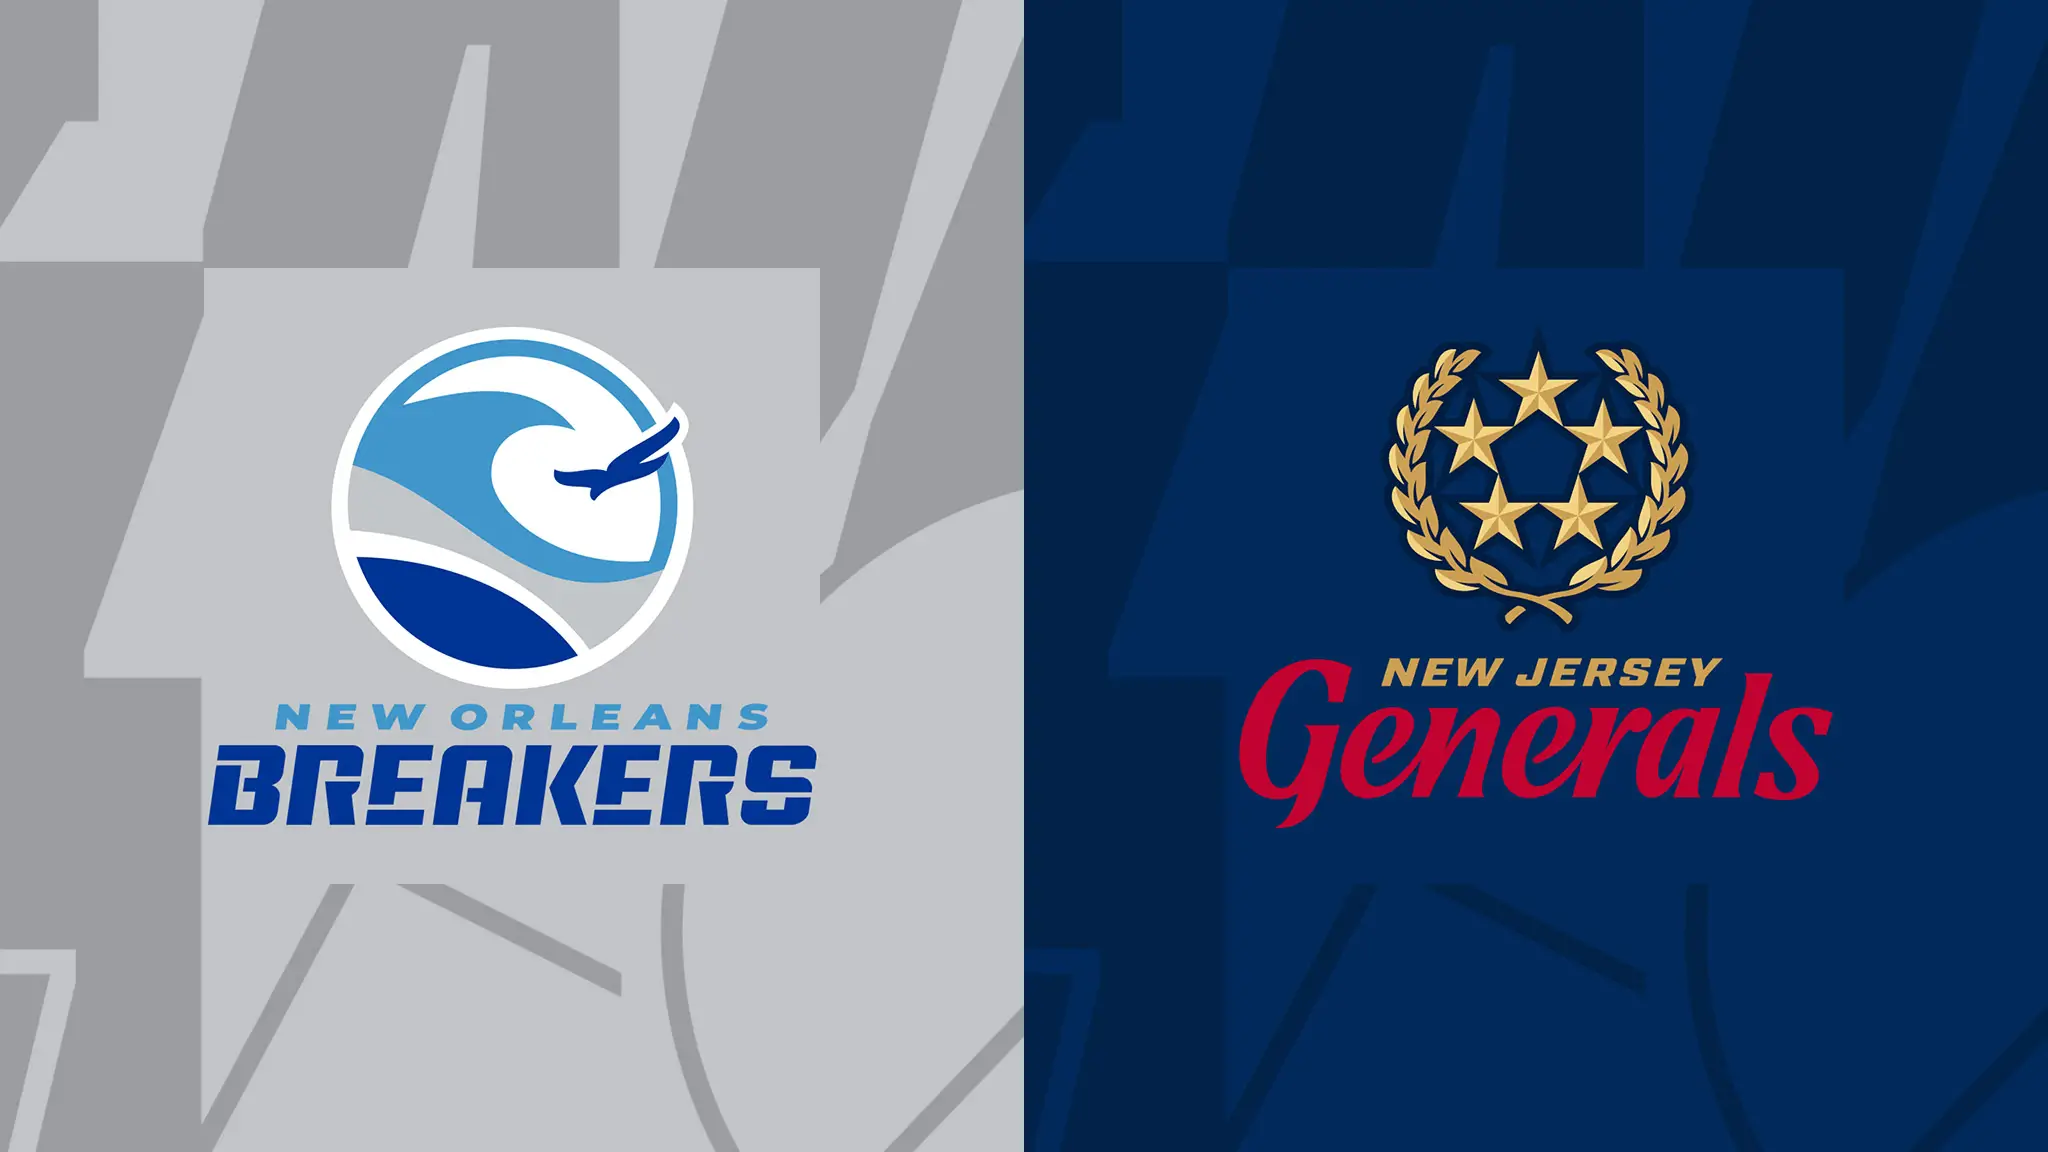 What to expect in New Orleans Breakers vs. New Jersey Generals